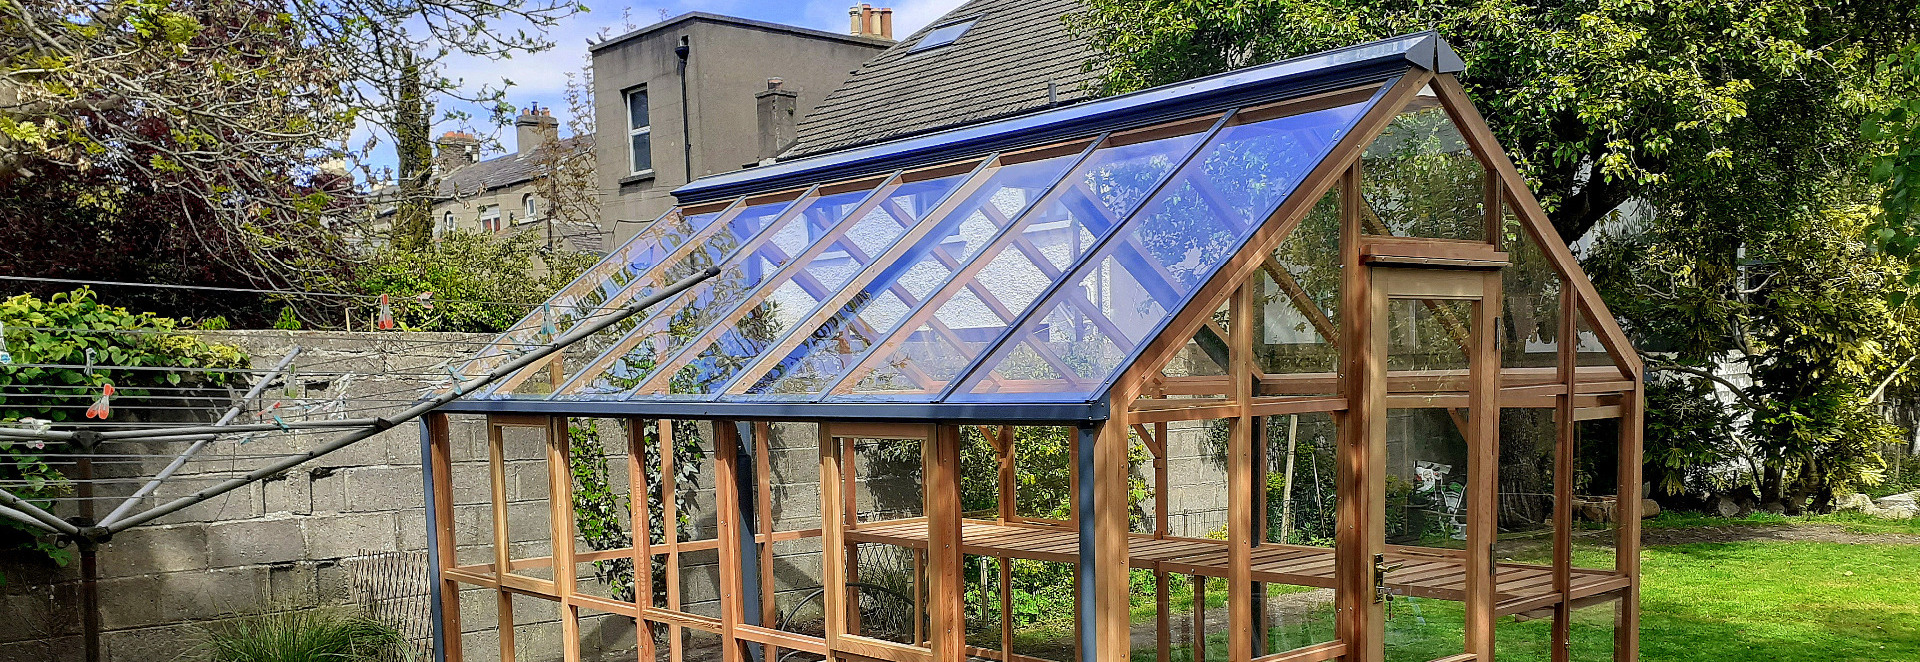 The Classic Ten Greenhouse installation in Rathgar, Dublin 6 - supplied + fitted by Owen Chubb Garden Landscapers